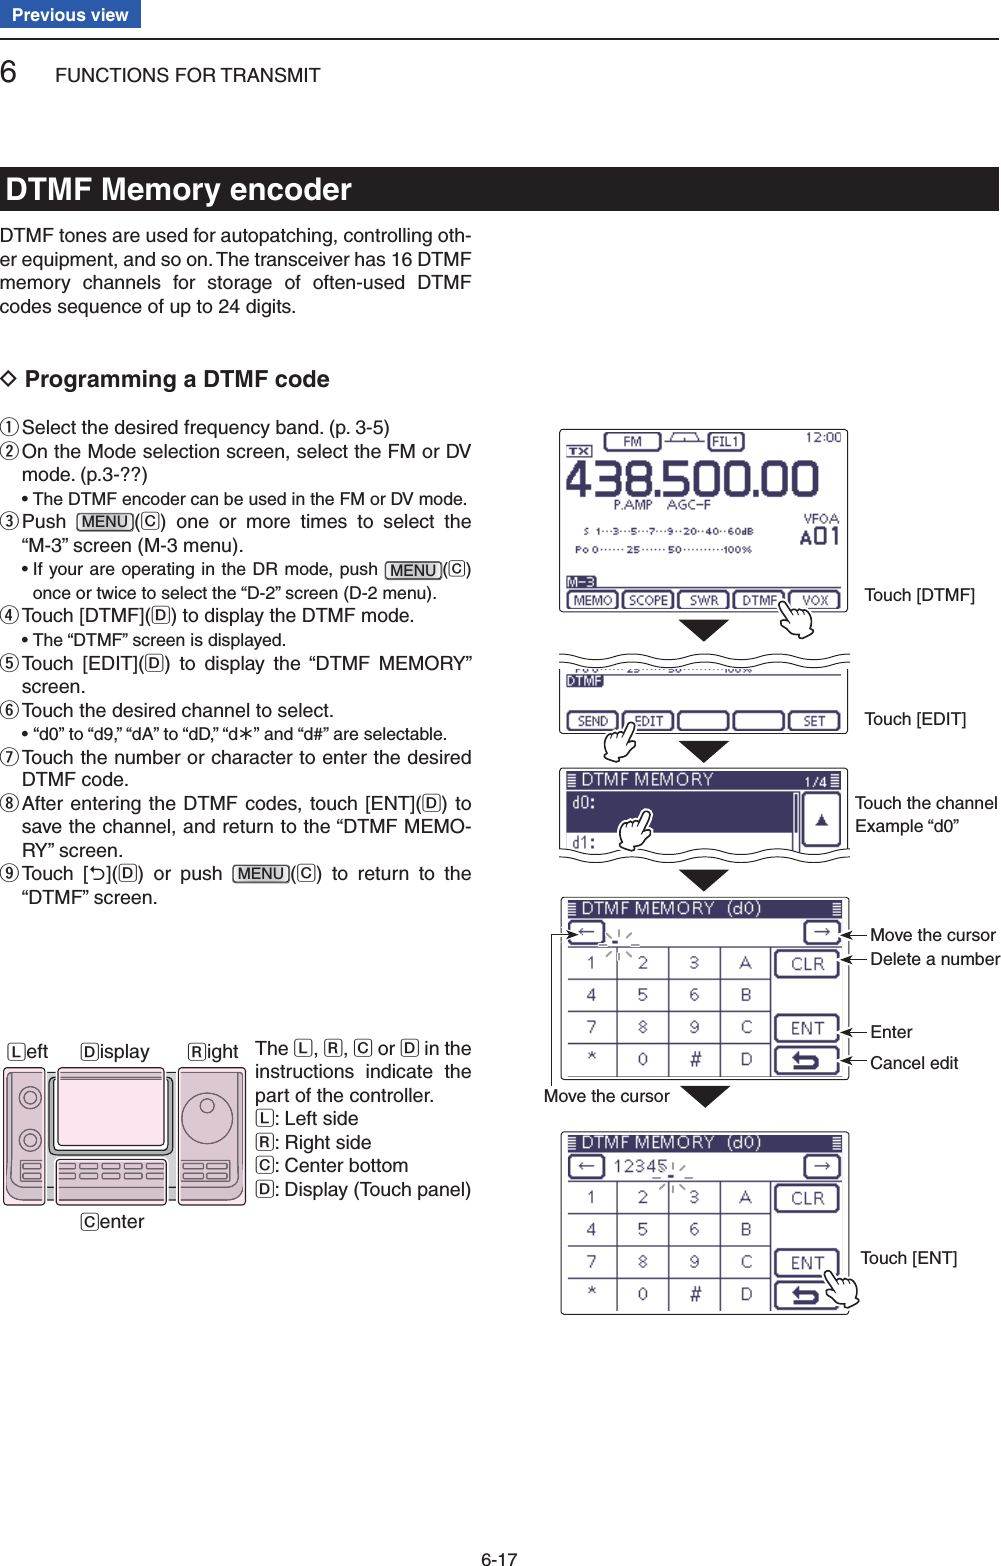 6FUNCTIONS FOR TRANSMIT6-17Previous viewDTMF Memory encoderDTMF tones are used for autopatching, controlling oth-er equipment, and so on. The transceiver has 16 DTMF memory channels for storage of often-used DTMF codes sequence of up to 24 digits.Programming a DTMF code DSelect the desired frequency band. (p. 3-5) q On the Mode selection screen, select the FM or DV  wmode. (p.3-??) •  The DTMF encoder can be used in the FM or DV mode. Push  eMENU(C) one or more times to select the “M-3” screen (M-3 menu). •  If your are operating in the DR mode, push MENU(C) once or twice to select the “D-2” screen (D-2 menu). Touch [DTMF]( rD) to display the DTMF mode.  • The “DTMF” screen is displayed. Touch [EDIT]( tD) to display the “DTMF MEMORY” screen. Touch the desired channel to select. y •  “d0” to “d9,” “dA” to “dD,” “d½” and “d#” are selectable. Touch the  unumber or character to enter the desired DTMF code. After entering the DTMF codes, touch [ENT]( iD) to save the channel, and return to the “DTMF MEMO-RY” screen. Touch [ o](D) or push MENU(C) to return to the “DTMF” screen.The L, R, C or D in the instructions indicate the part of the controller.L: Left sideR: Right sideC: Center bottomD: Display (Touch panel)Left RightCenterDisplayMove the cursorMove the cursorDelete a numberEnterCancel editTouch [ENT]Touch [EDIT]Touch [DTMF]Touch the channel Example “d0”